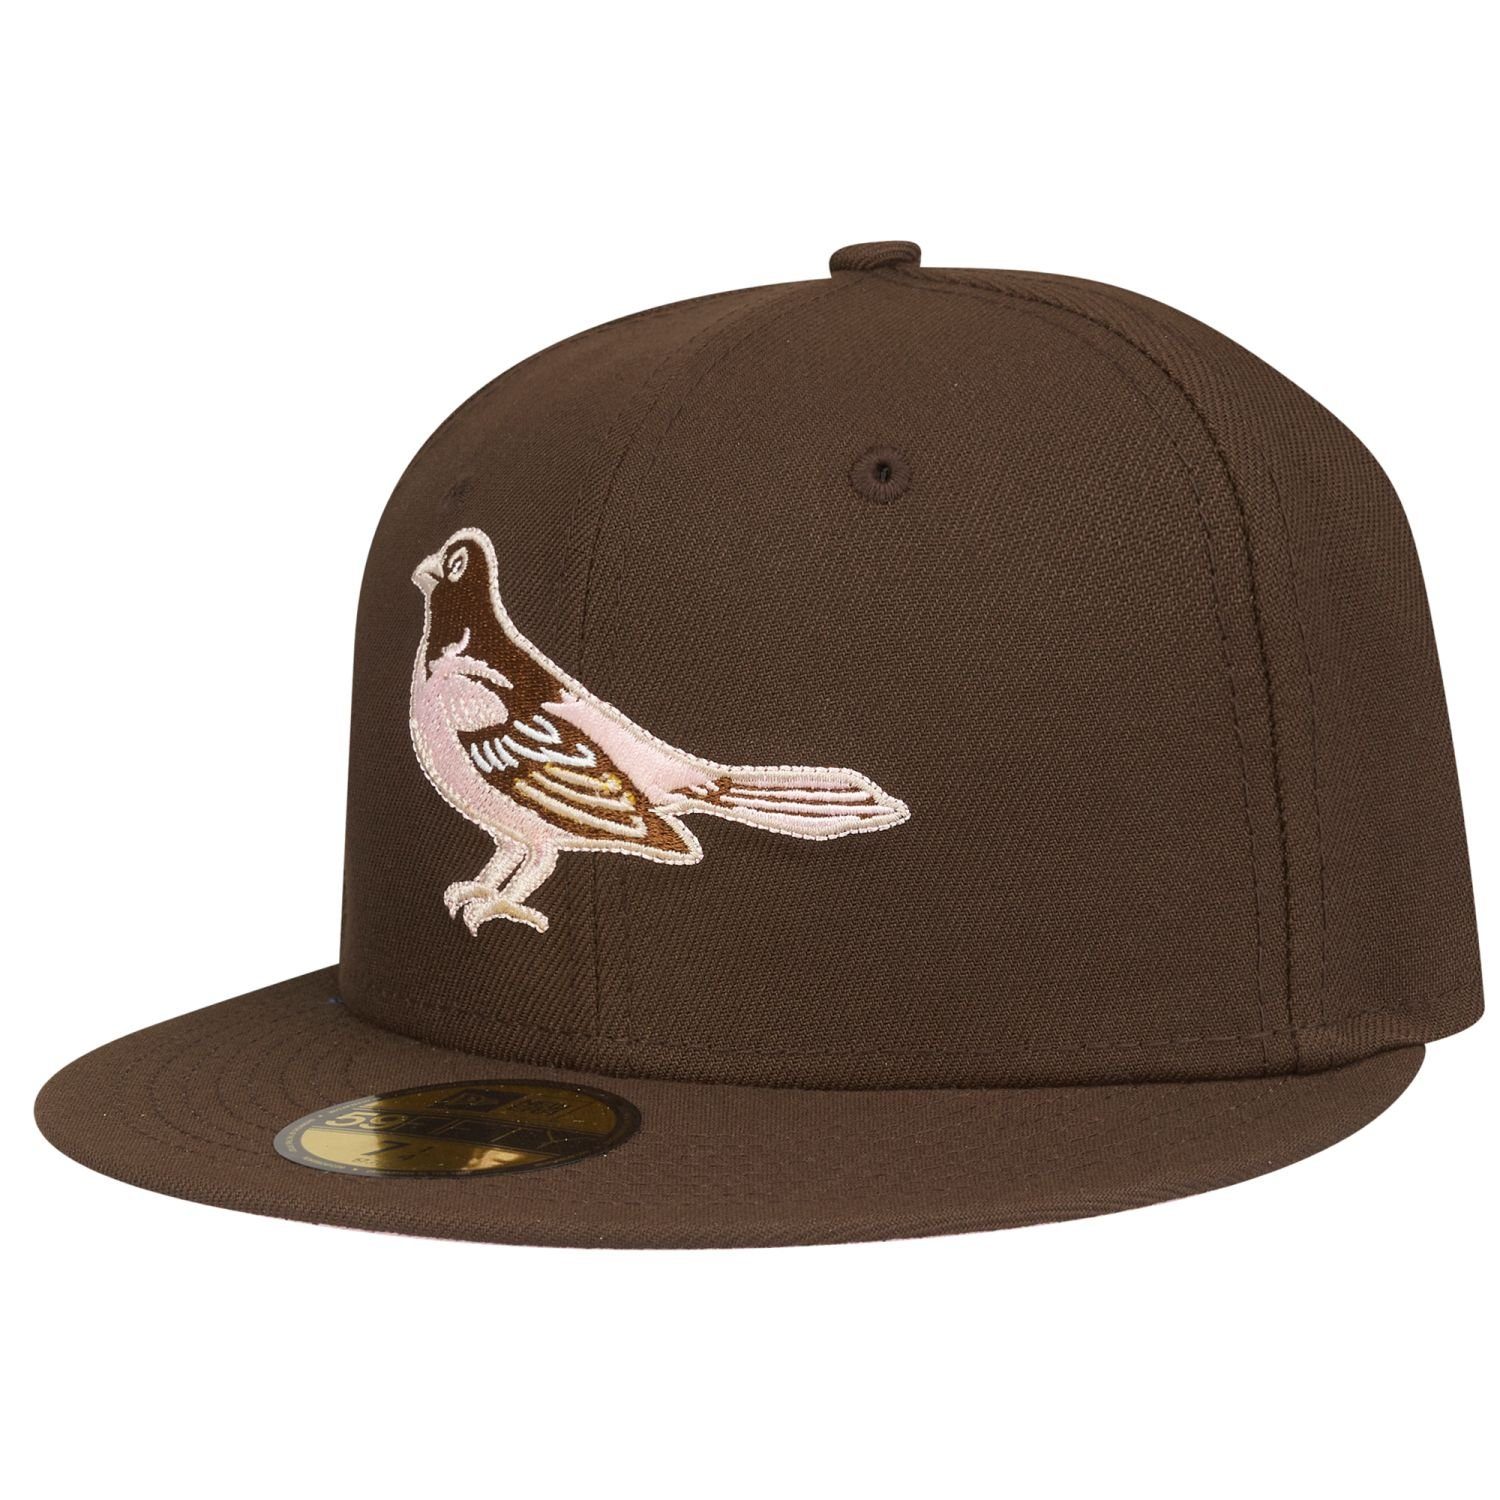 Fitted 59Fifty COOPERSTOWN Orioles Era Cap Baltimore New